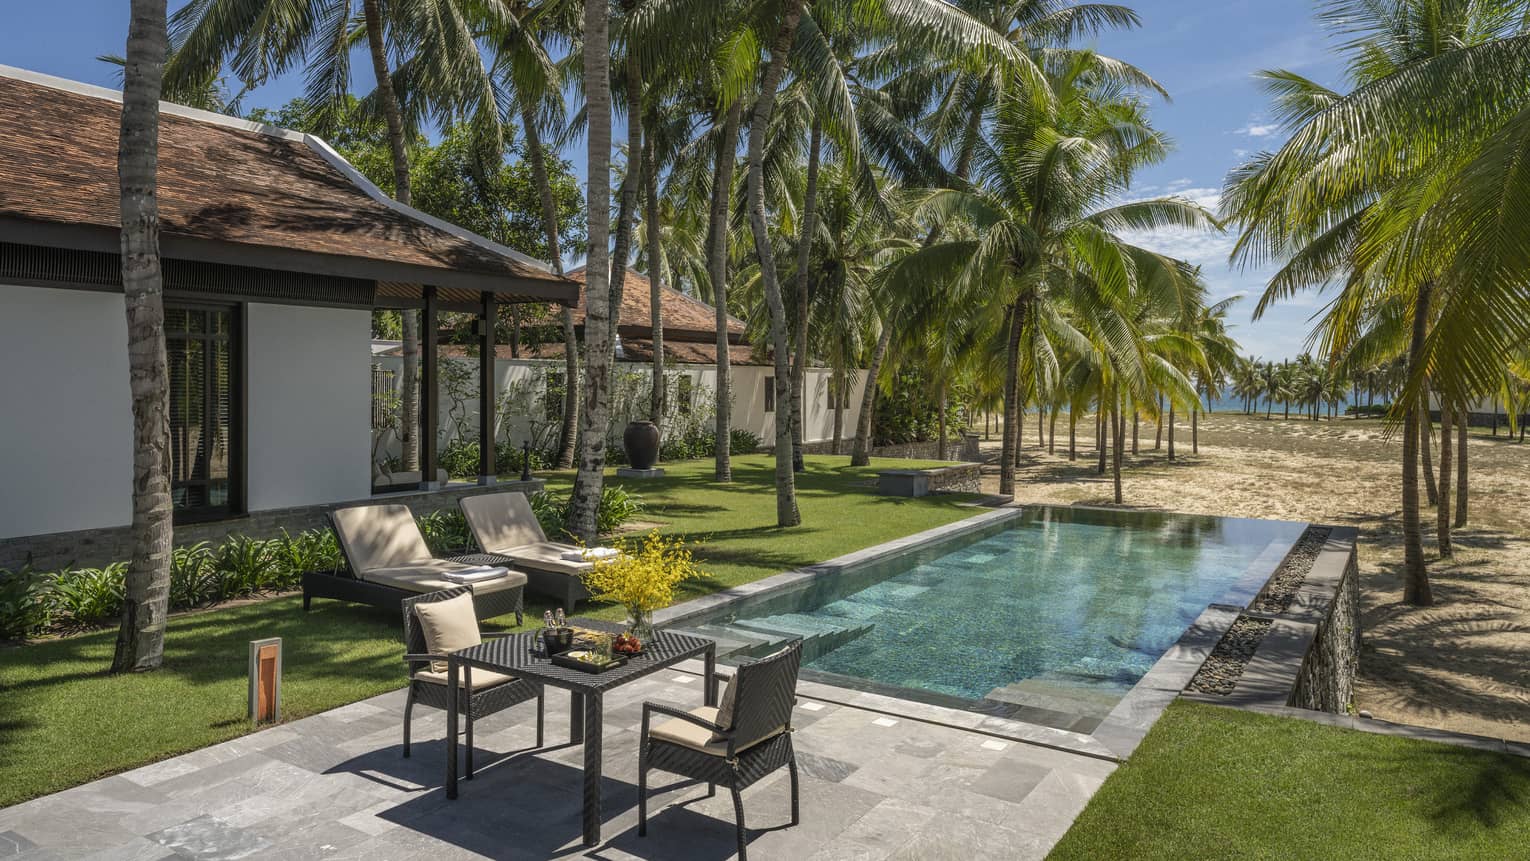 One Bedroom Pool Villa pool area with lounge chairs, two-seater table, palm trees and sunshine